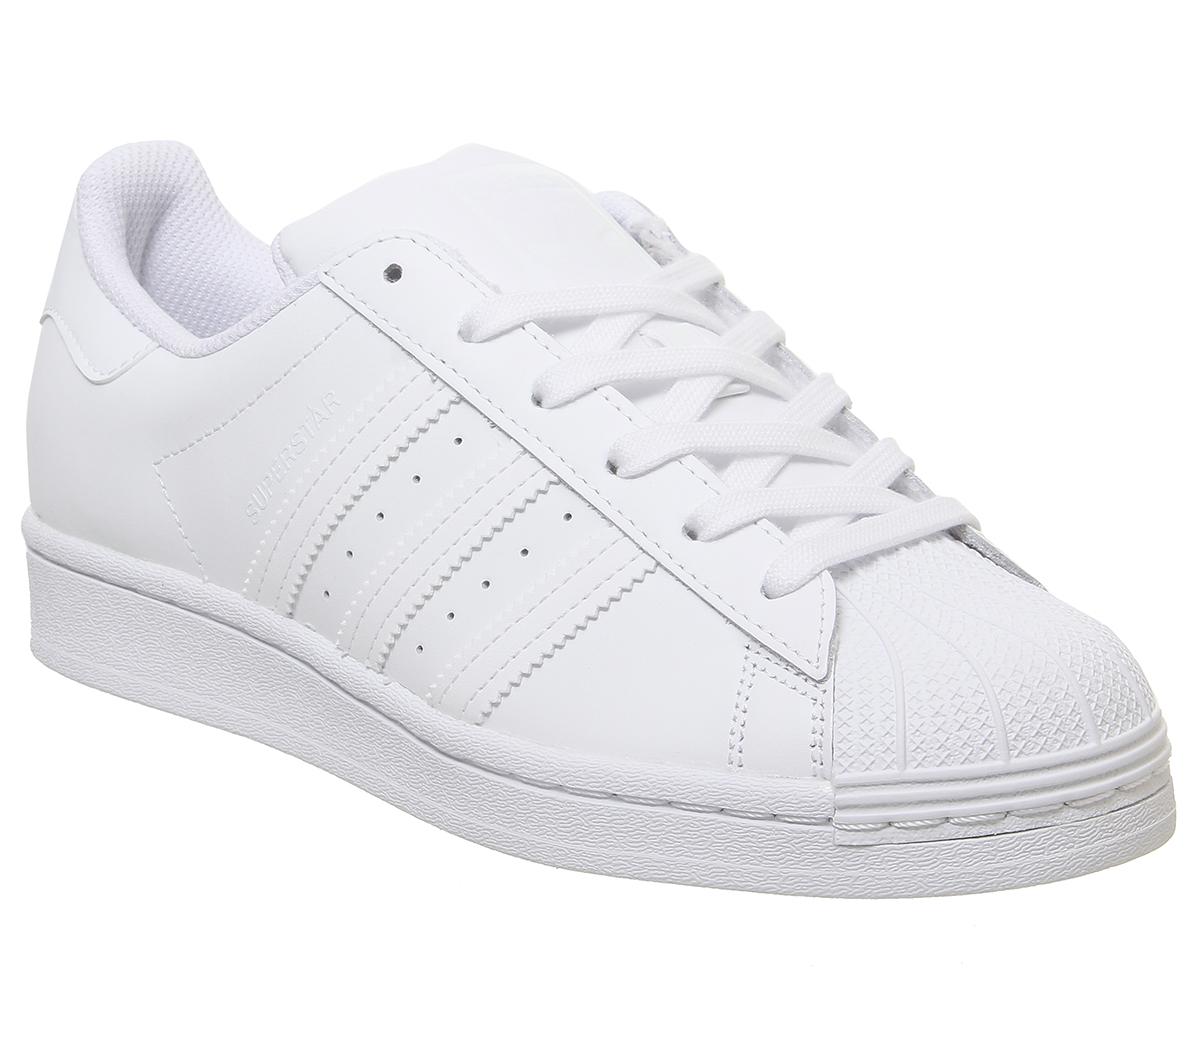 adidas Superstar Gs Trainers White 